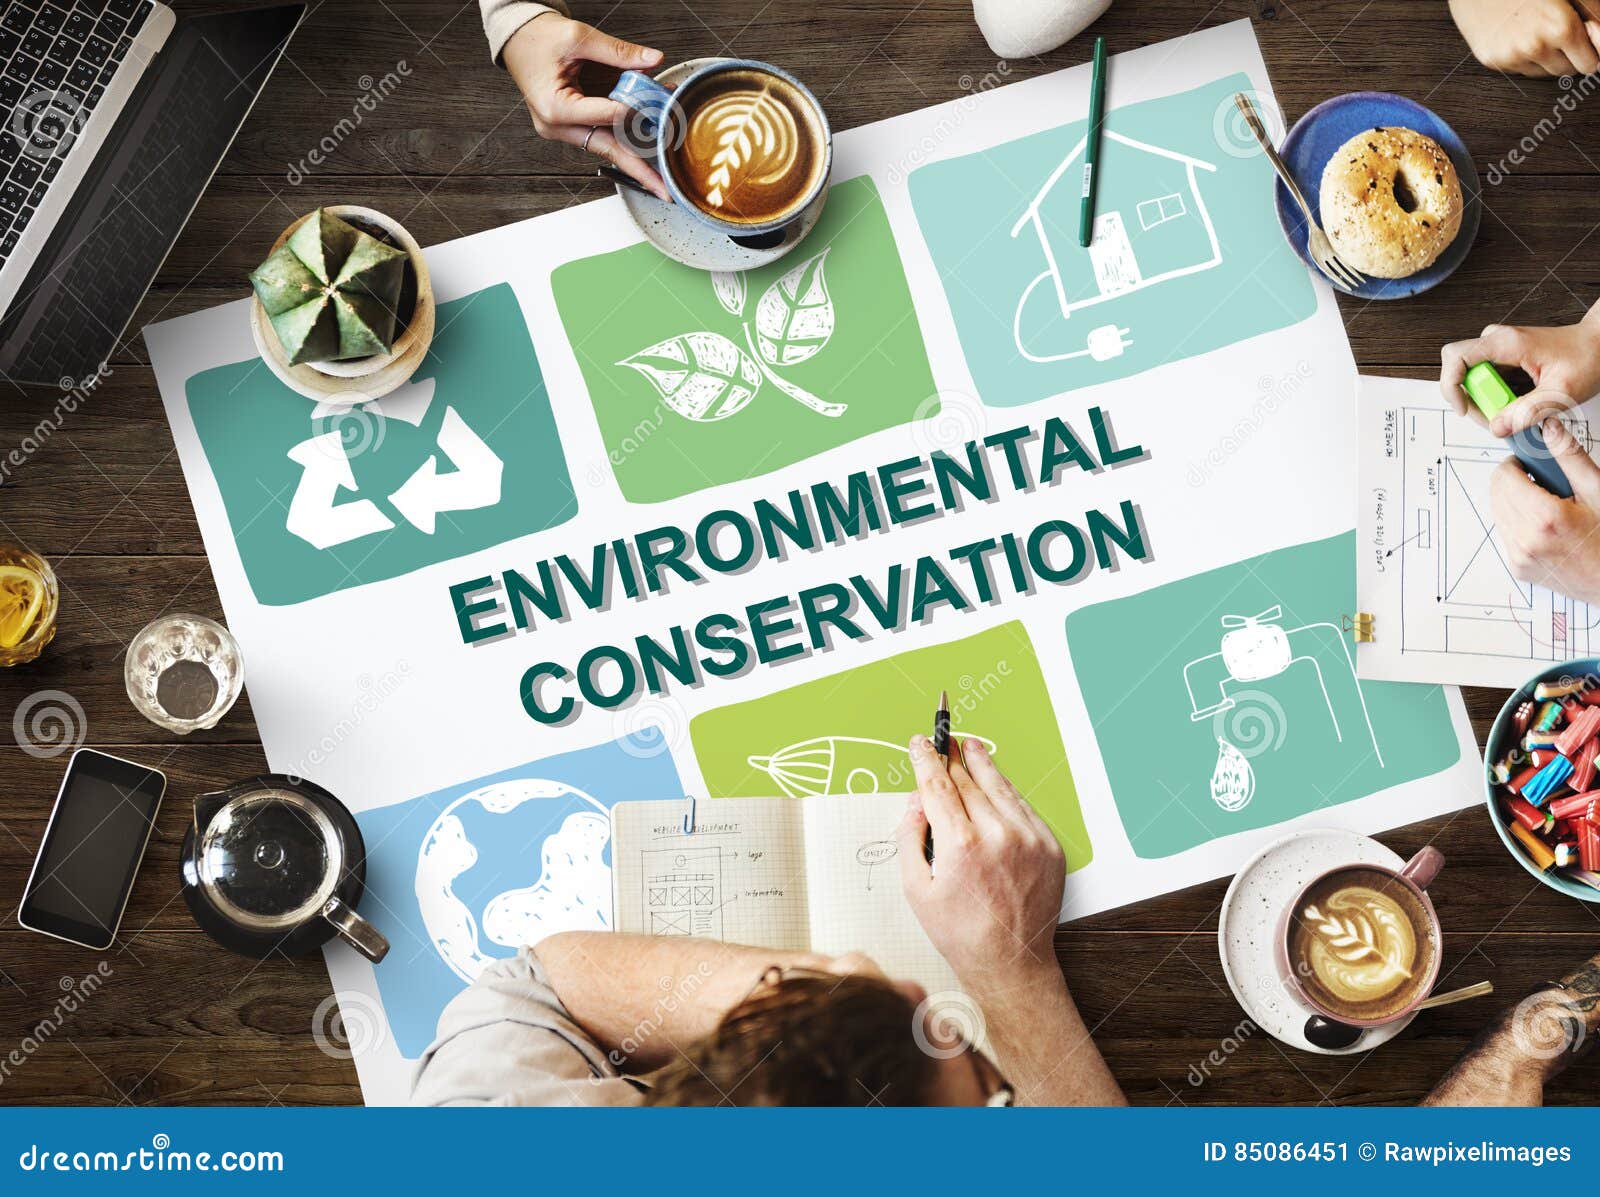 environmental conservation life preservation protection growth c